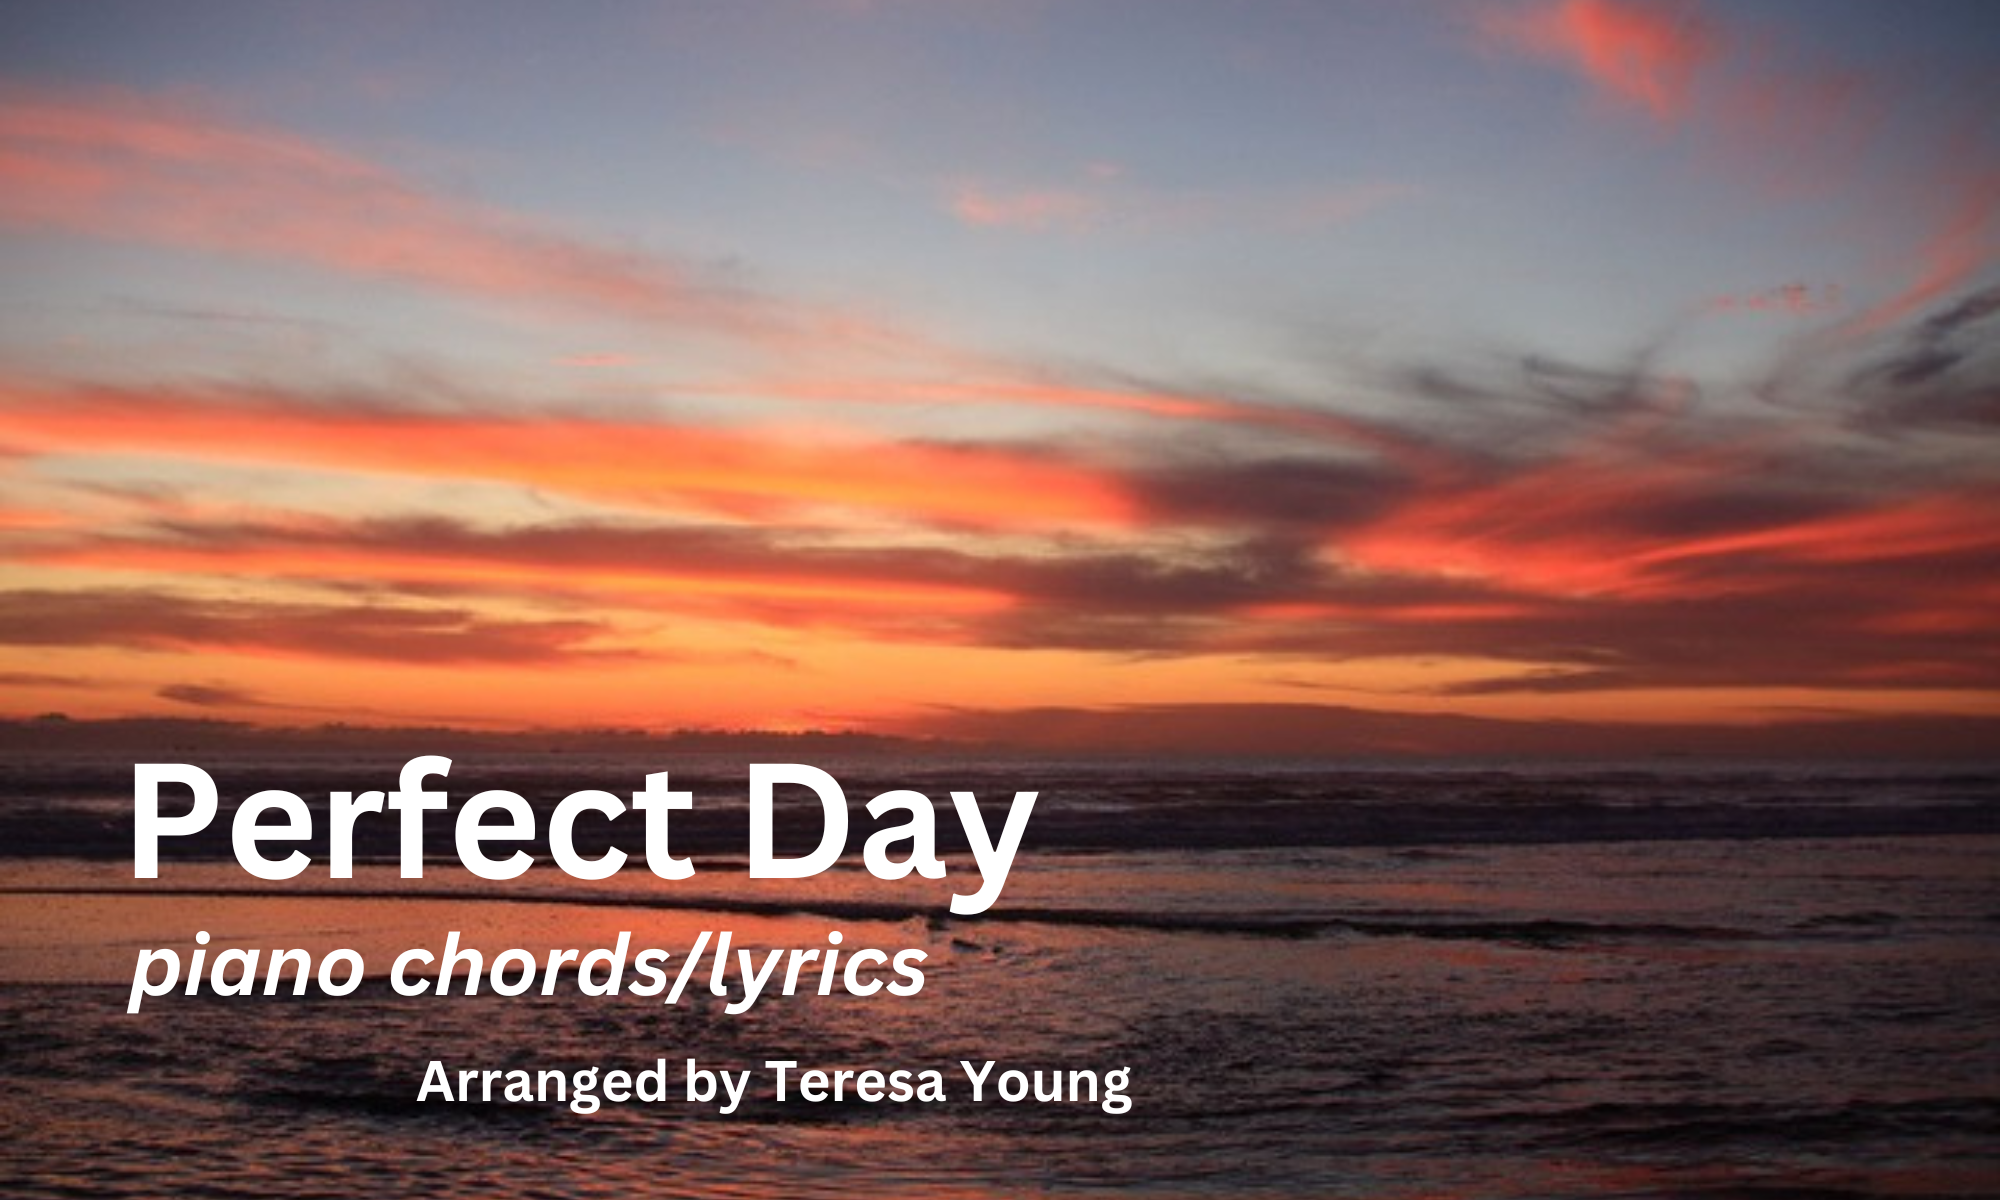 Perfect Day, piano chords & lyrics guide, arranged by Teresa Young